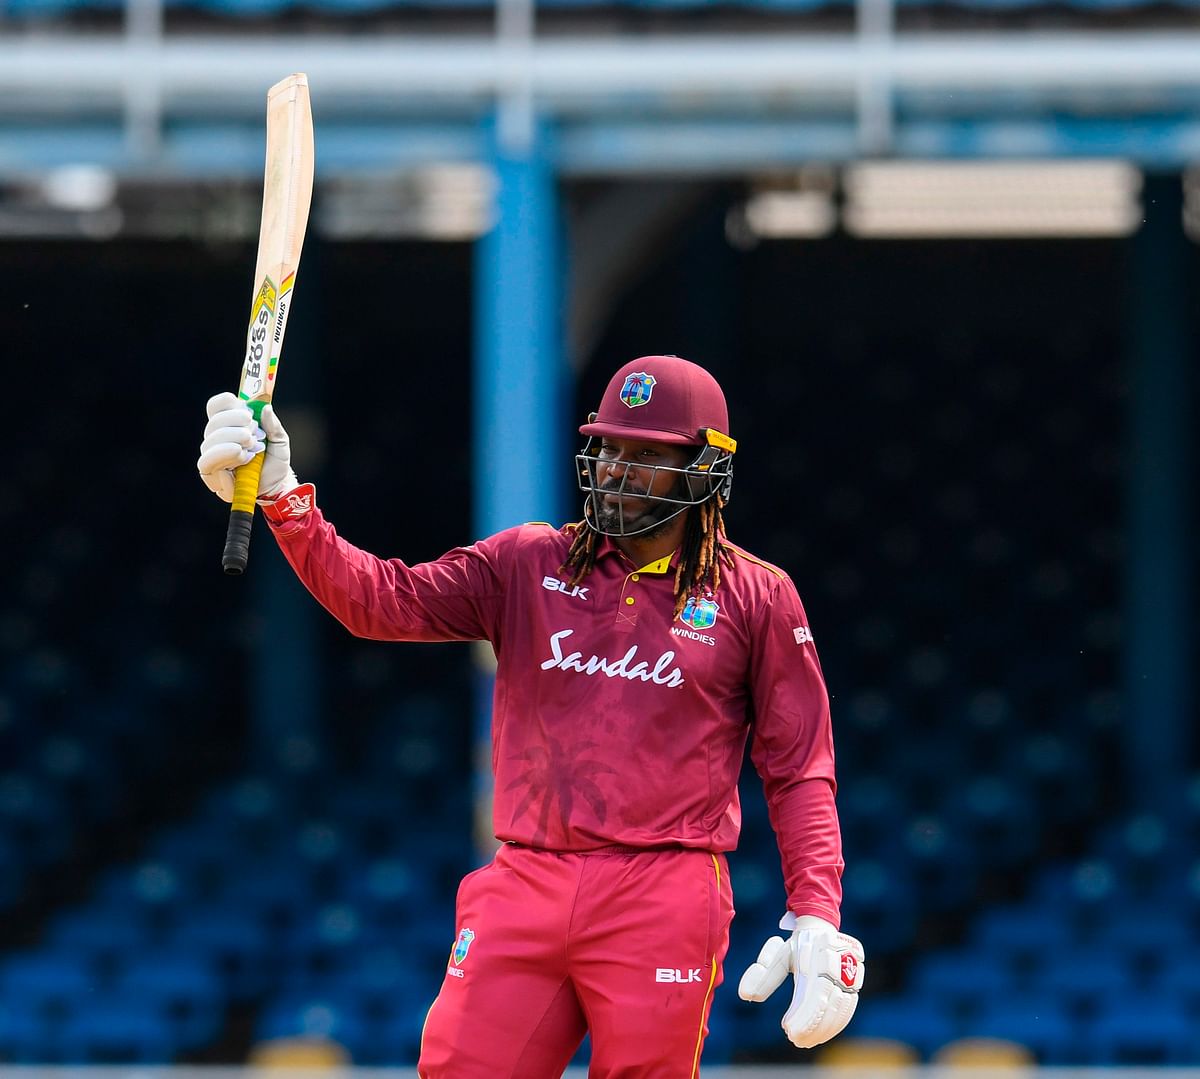 Chris Gayle of West Indies celebrates during the 2nd ODI match against India at Queens Park Oval in Port of Spain, Trinidad and Tobago, on 11 August 2019. Photo: AFP